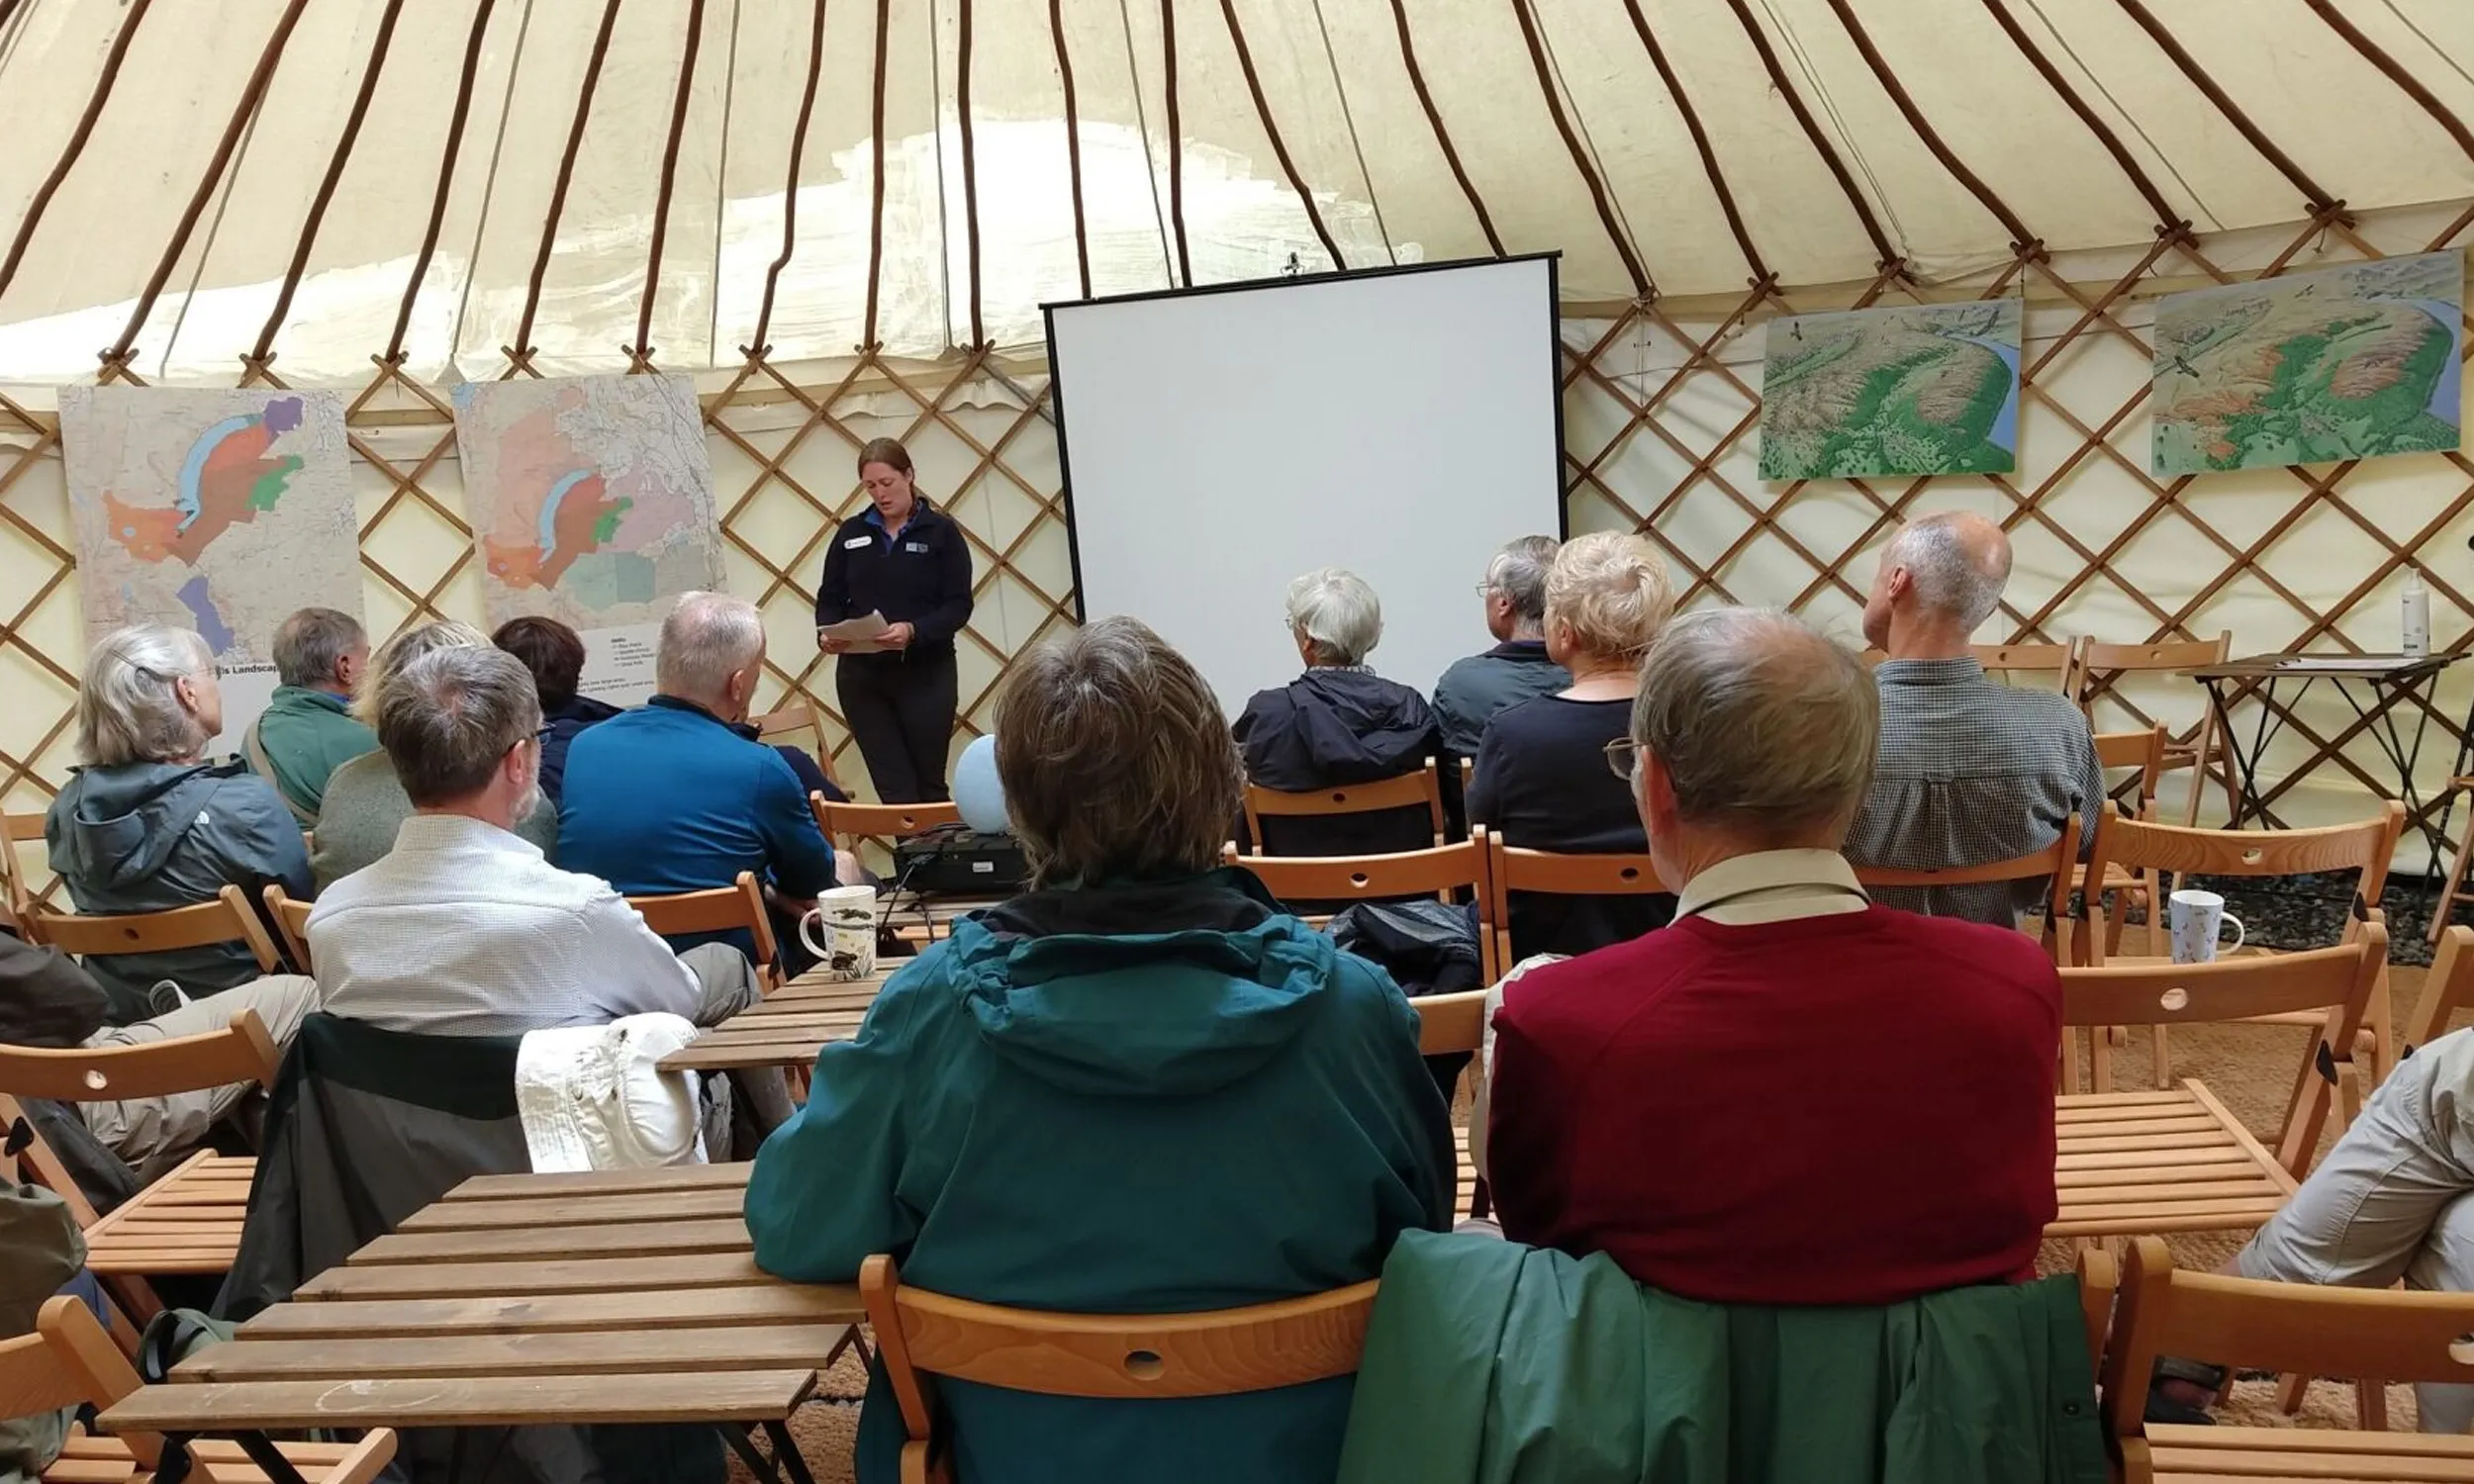 A group of people sitting down on wooden chairs, in a yurt, listening to a presentation.